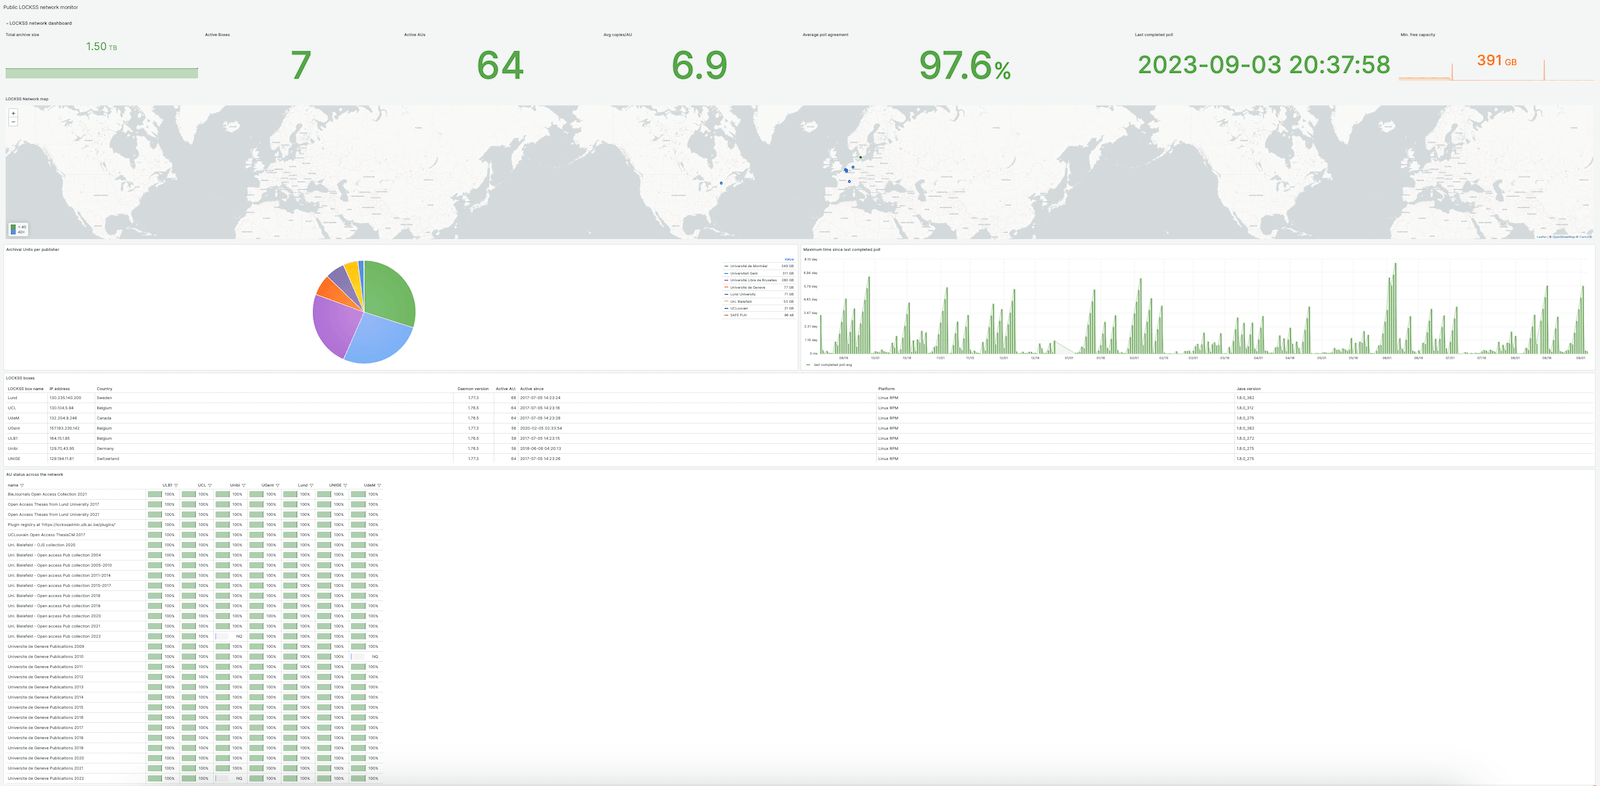 A public Grafana dashboard with a map, graphs, and charts that monitor the status of a digital preservation network